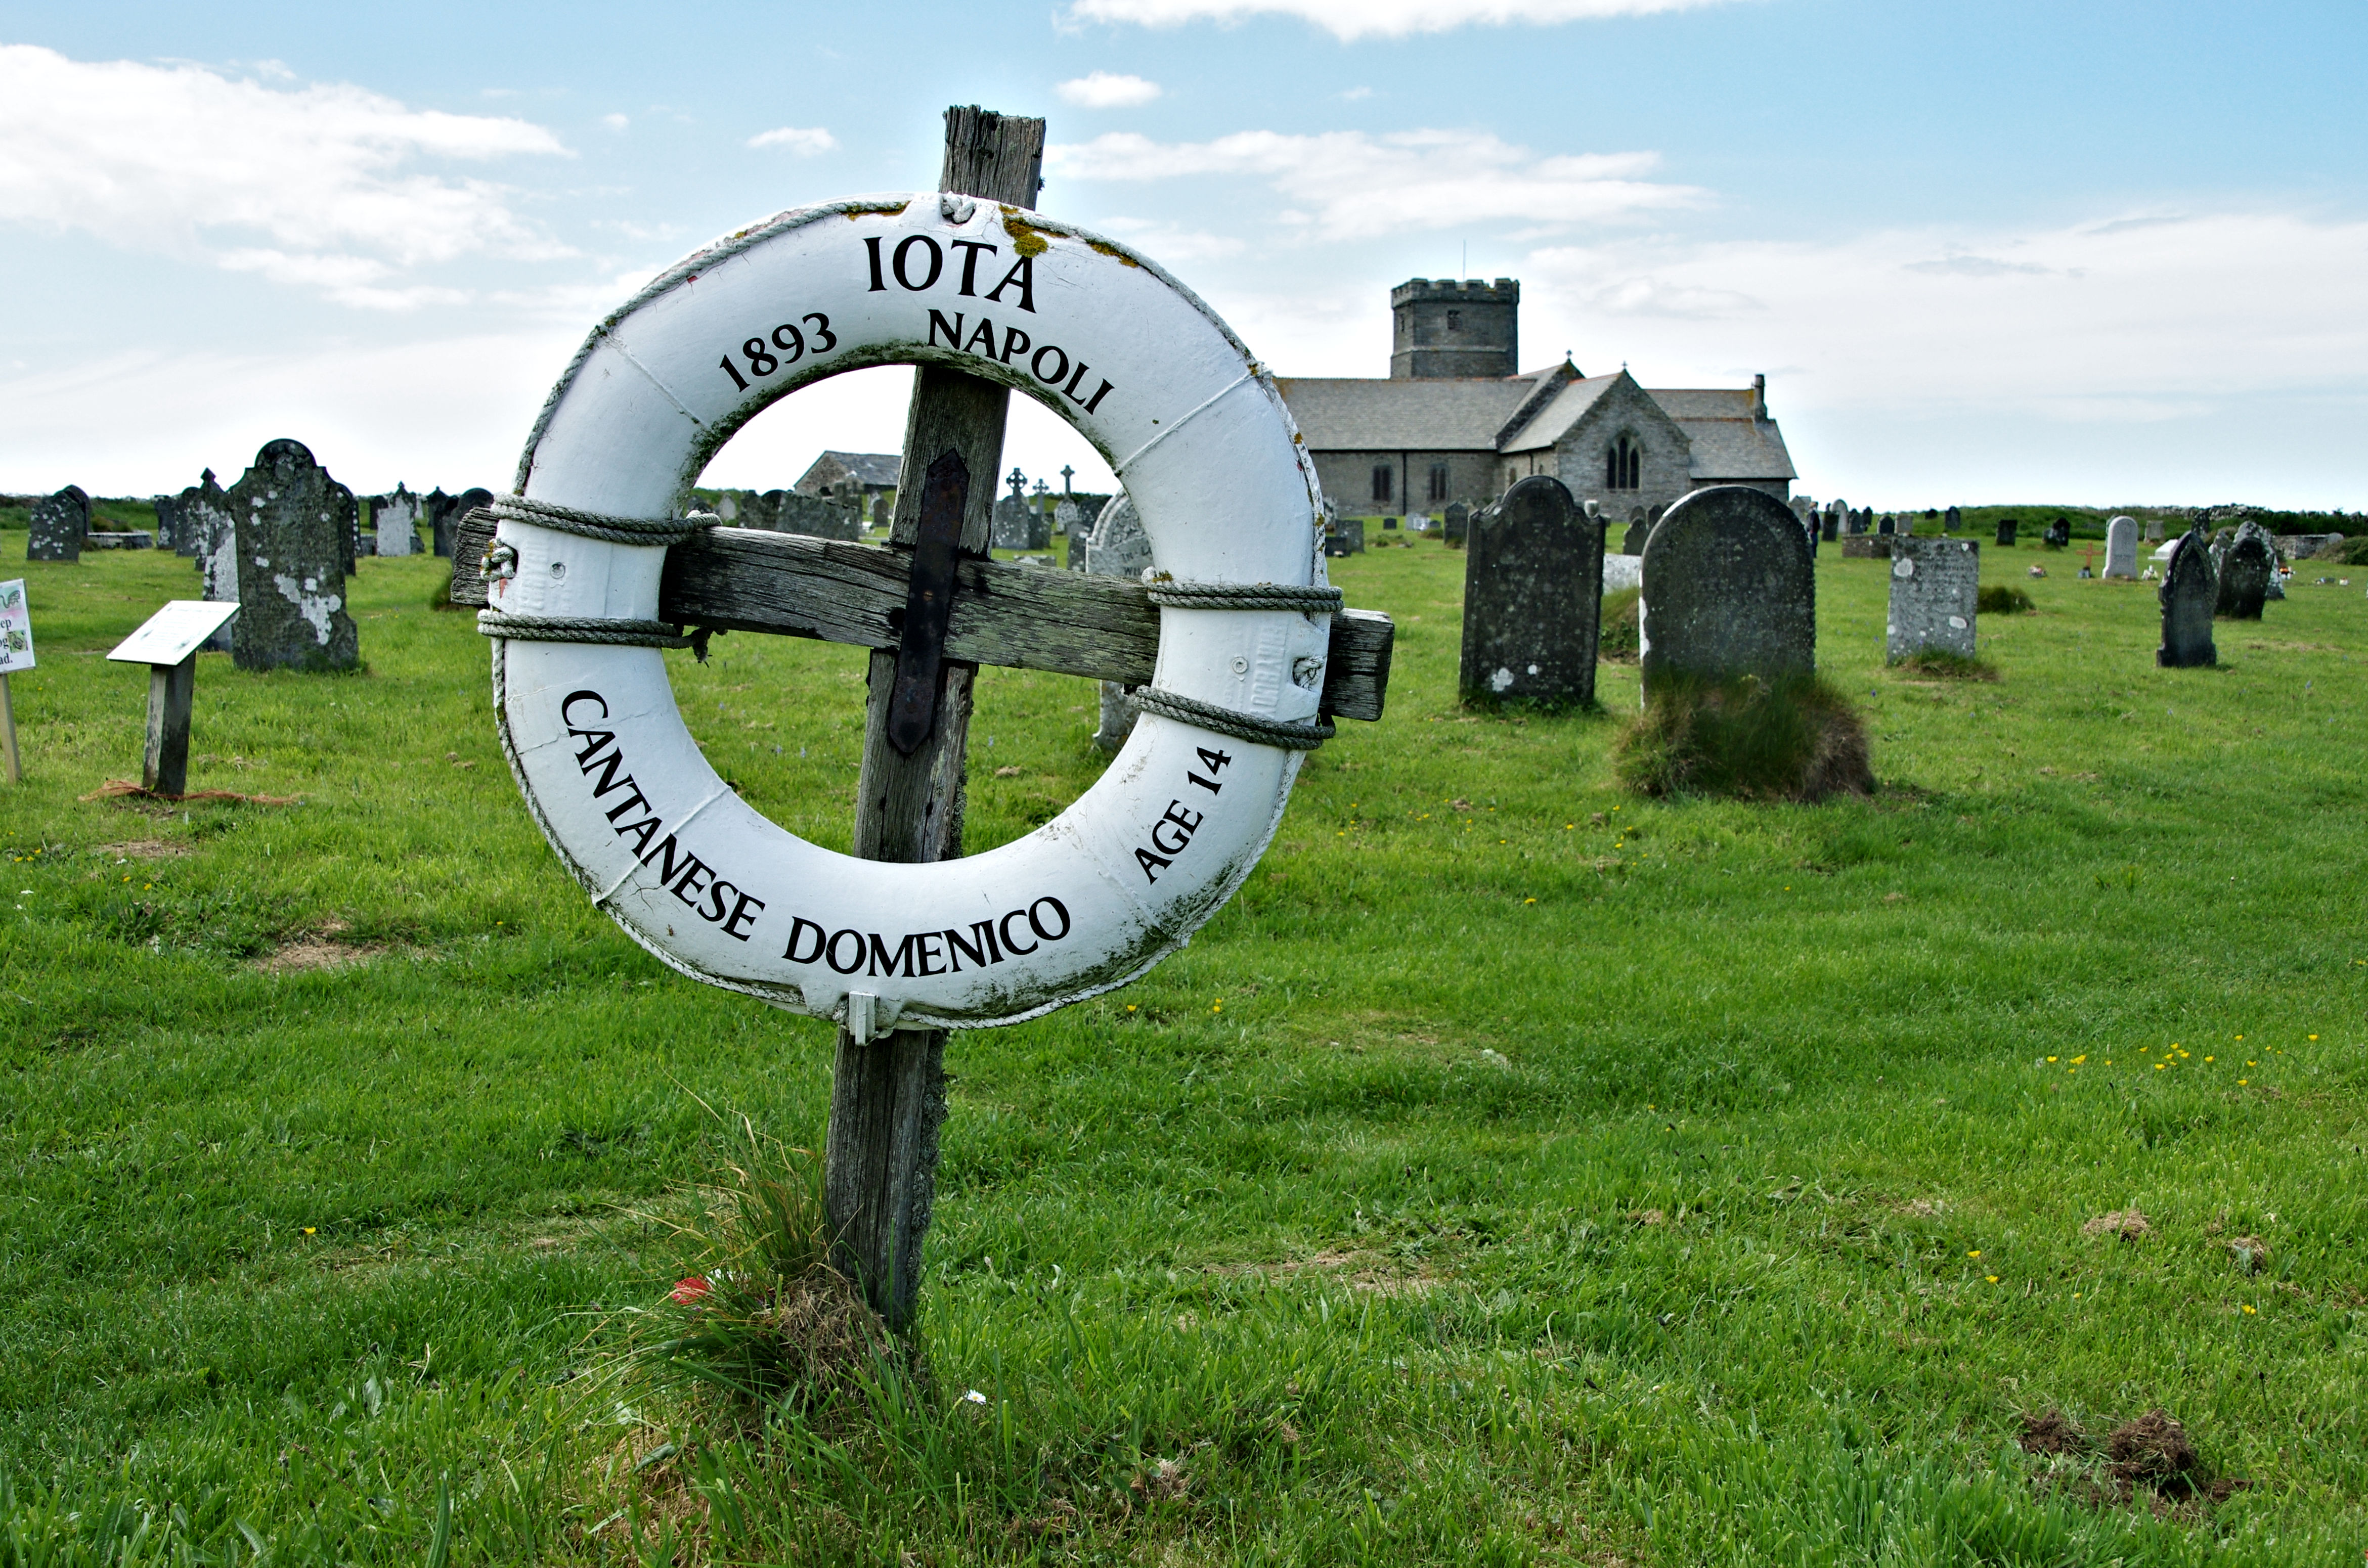 A tomb of an Italian boy in the graveyard of Tintagel Parish Church, Cornwall ( 2014-05-21.) The salvage of a wrecked ship was operated by the great grandfather of my friend's wife but the boy was found dead. コーンウォル，ティンタジェル教区教会墓地のイタリア少年の墓。